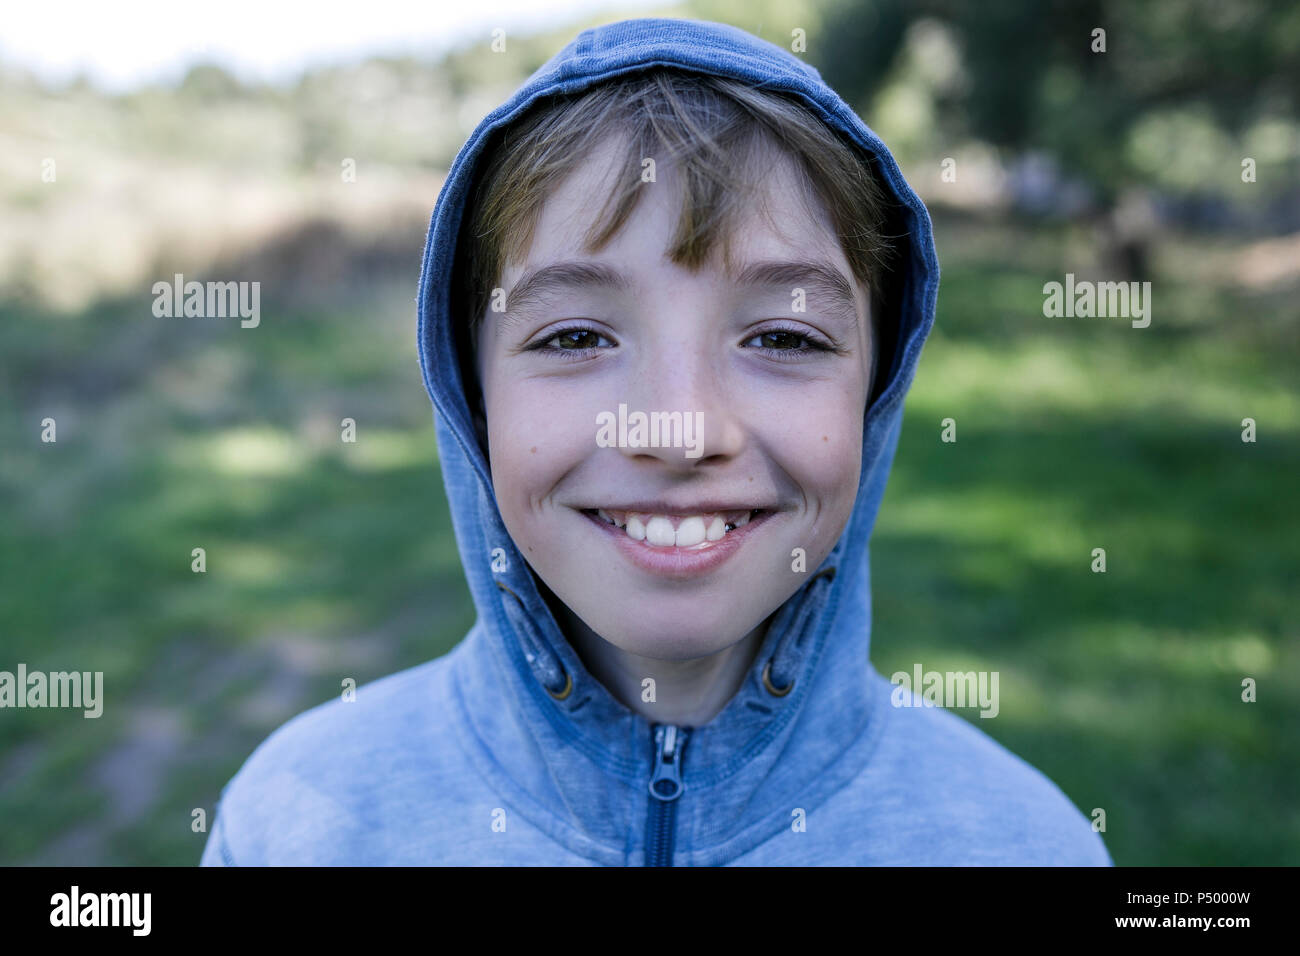 Portrait of laughing boy wearing blue hooded jacket Stock Photo